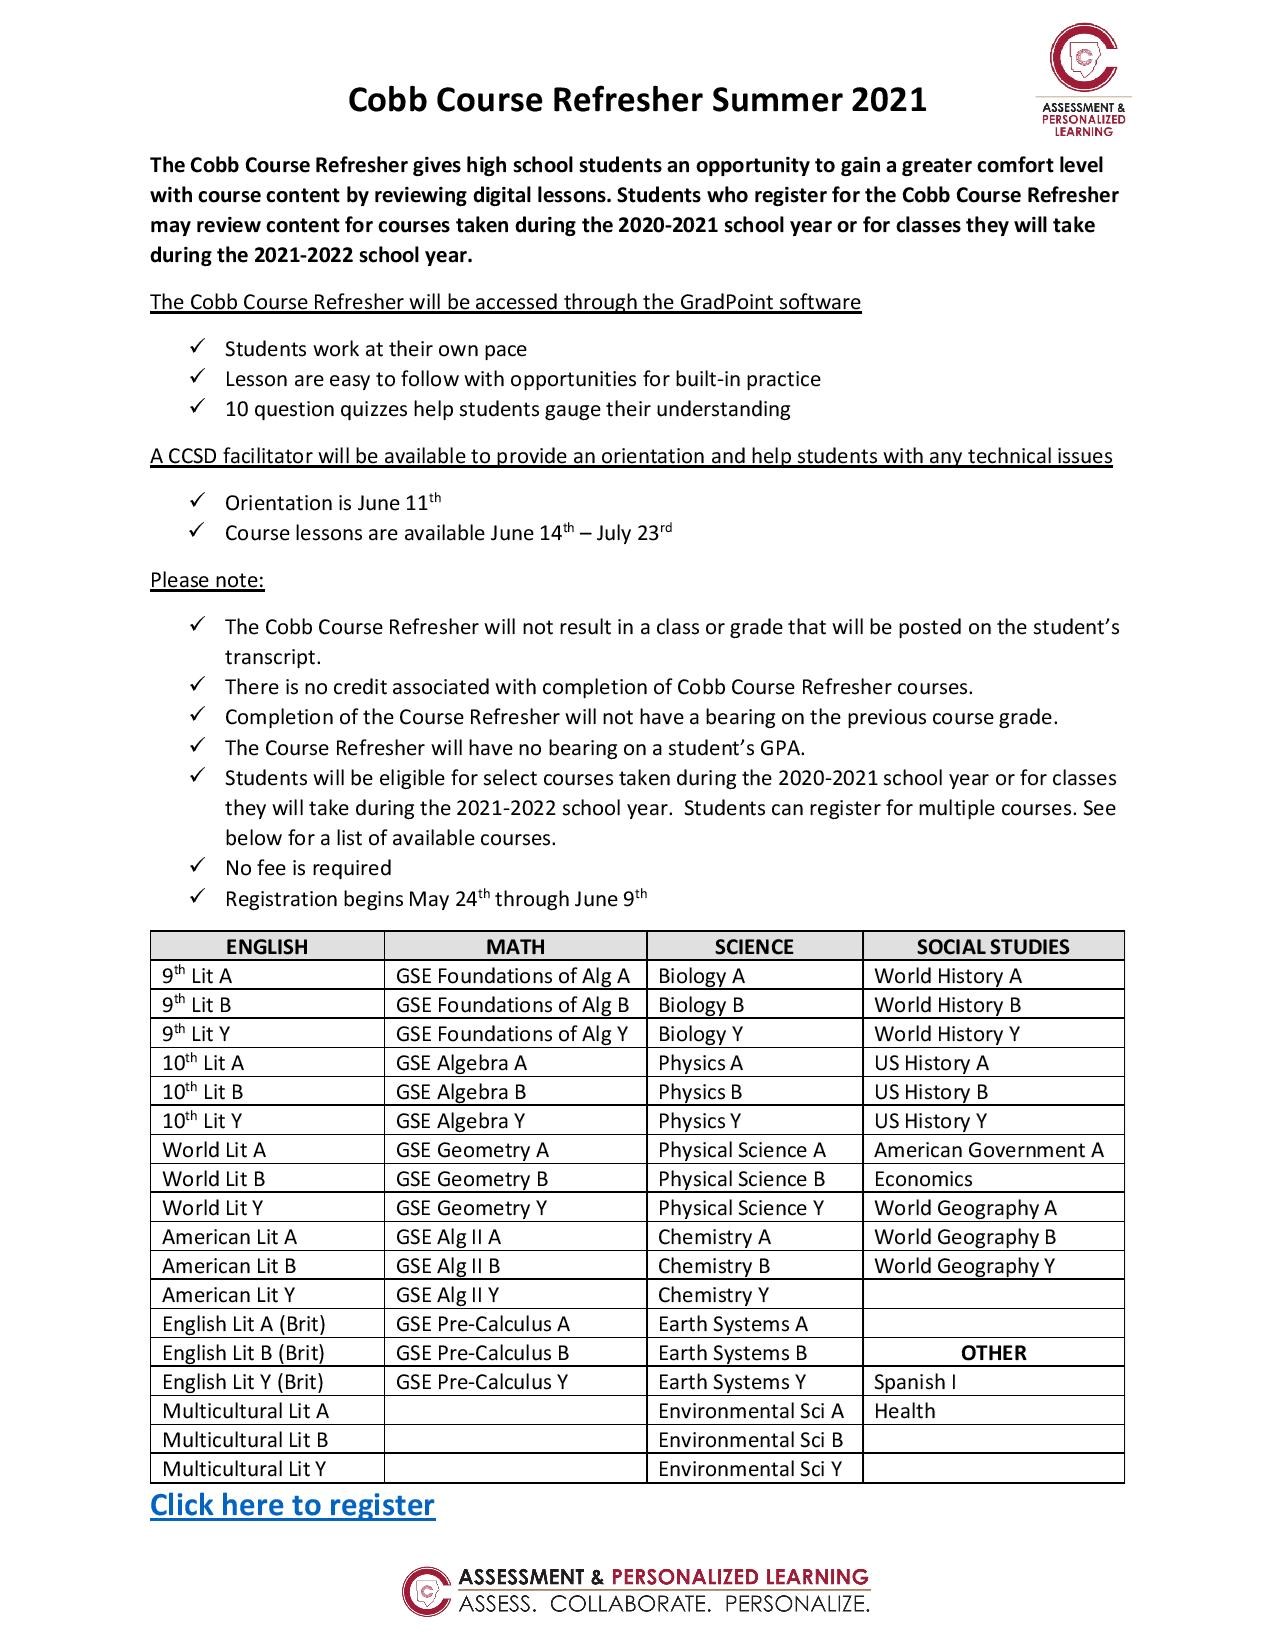 Cobb Course Refresher 2021 (1)-page-001.jpg